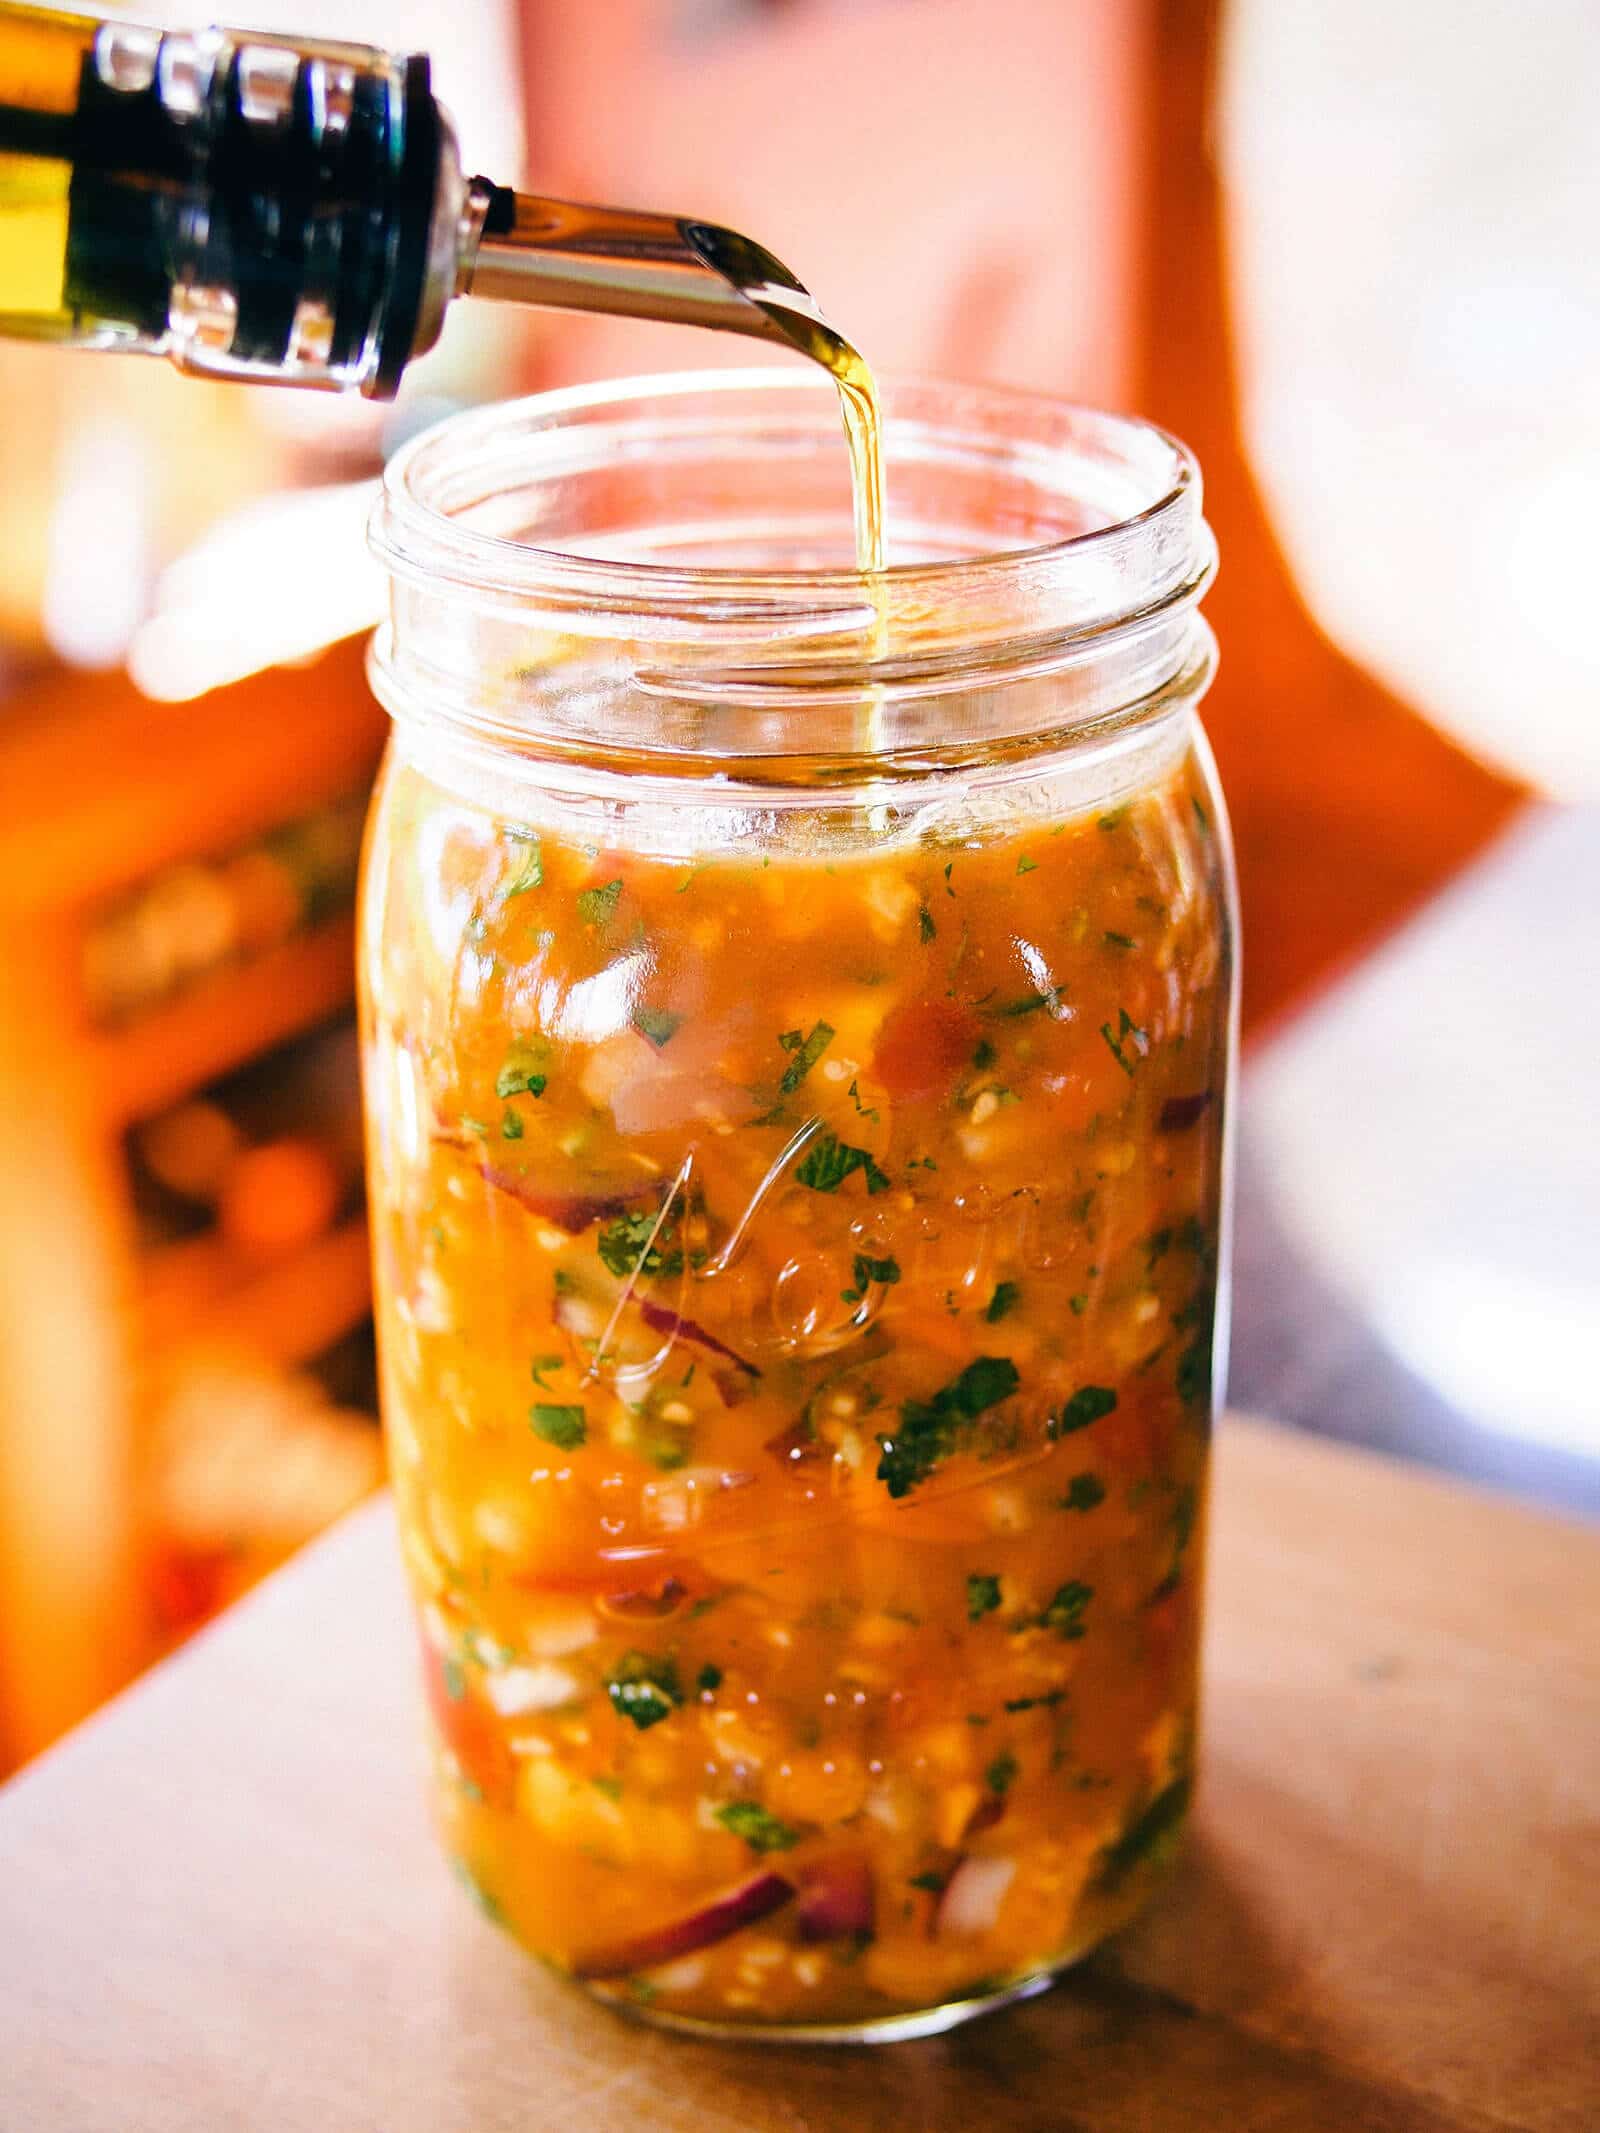 Olive oil pouring into a jar of salsa